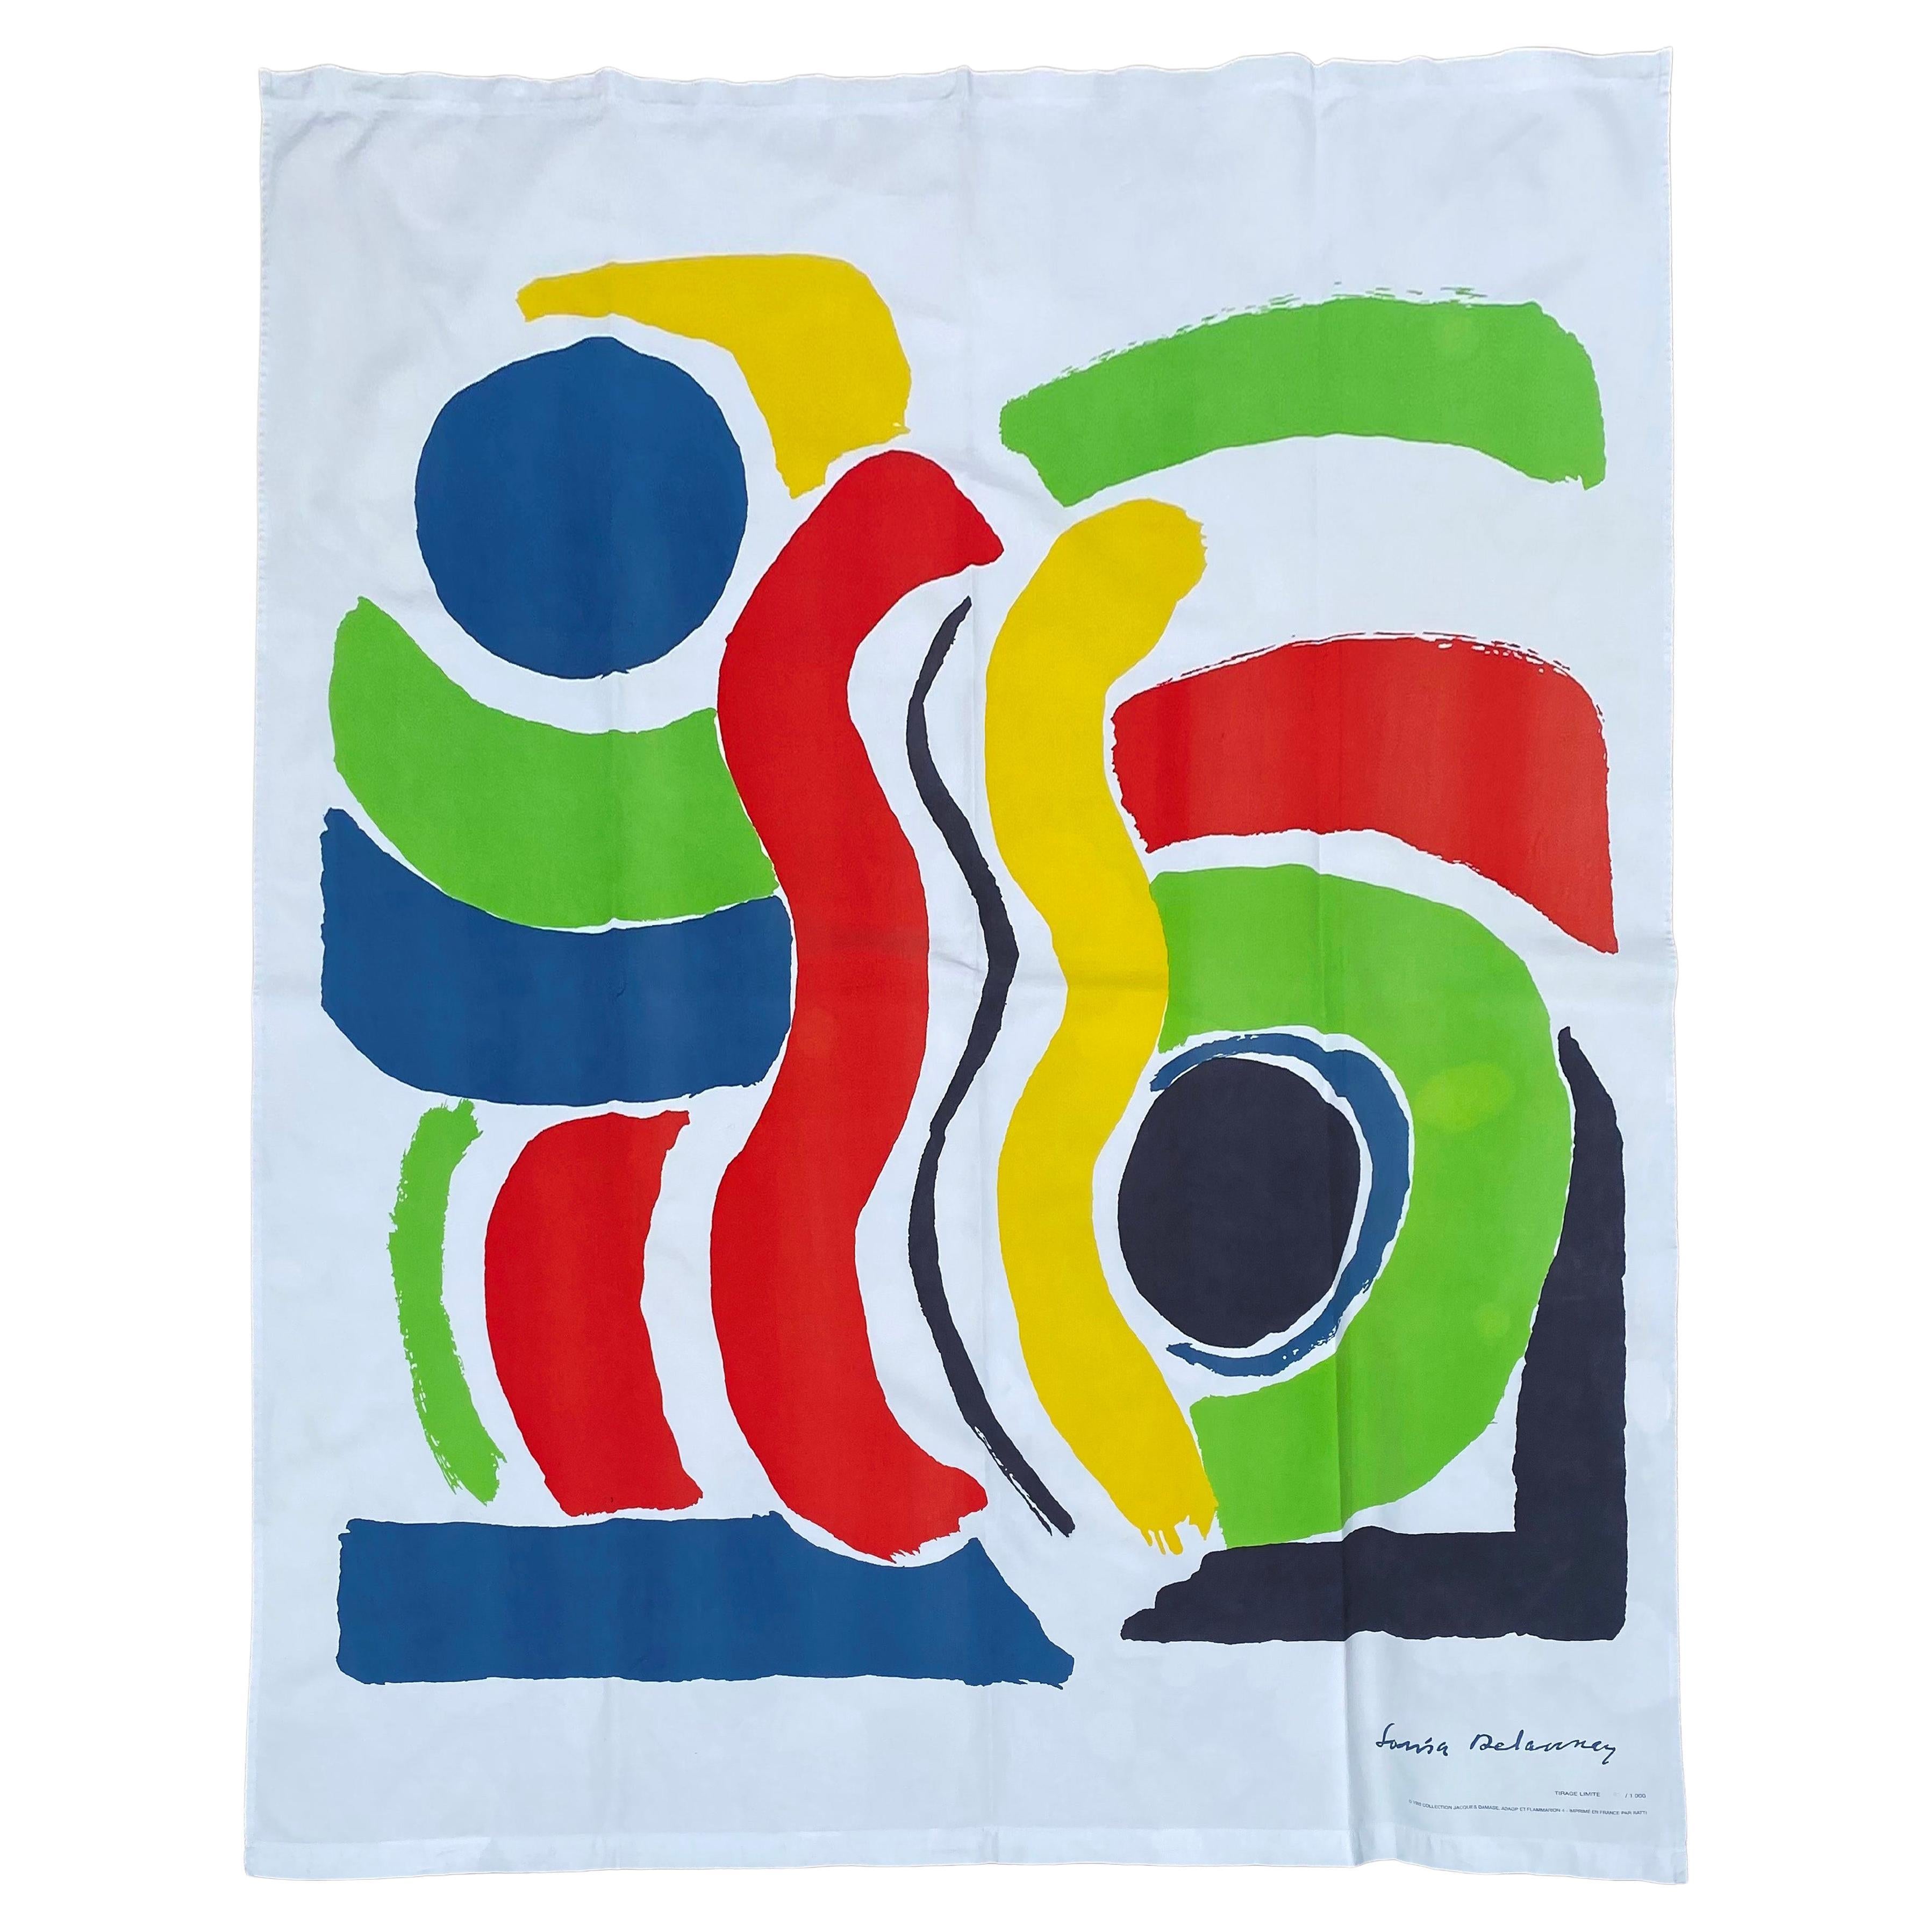 Sonia Delaunay, After "Children's Games", 1992